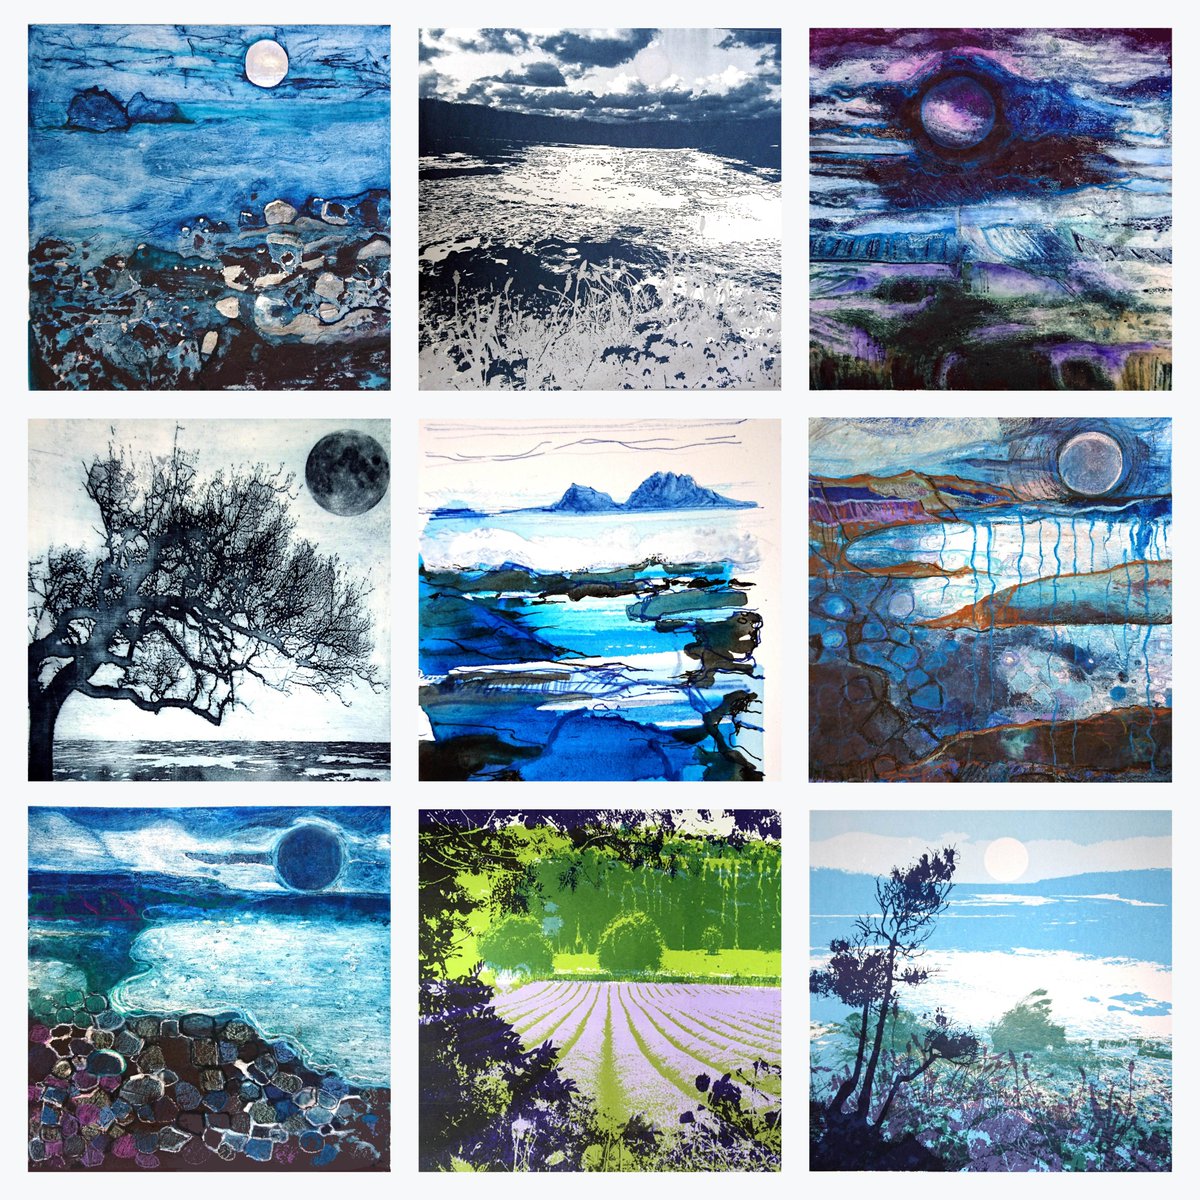 Just a few of my favourite things to print & paint 
#moon #sea #rocks #river #lavender #coastline #texture #printmaking #moonlight #pattern #reflections #moons #rockycoast